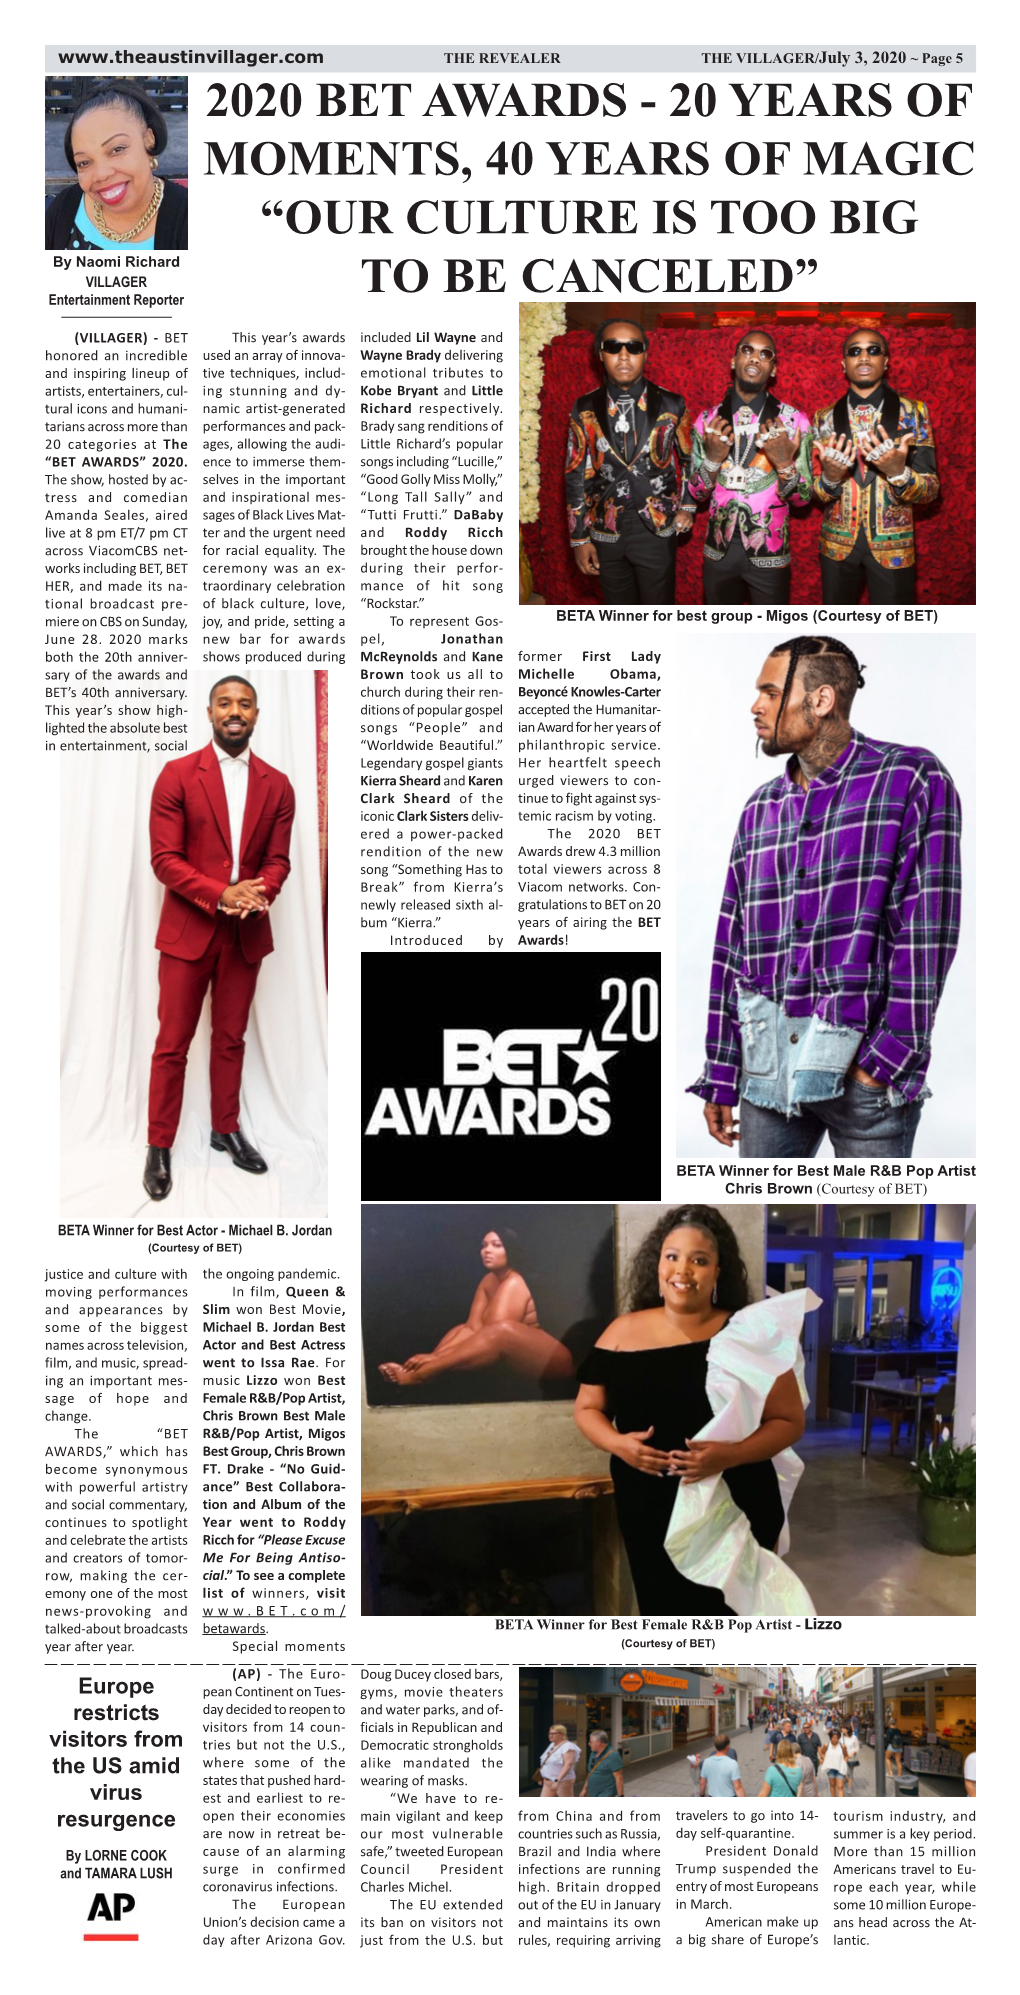 2020 BET AWARDS - 20 YEARS of MOMENTS, 40 YEARS of MAGIC “OUR CULTURE IS TOO BIG by Naomi Richard VILLAGER to BE CANCELED” Entertainment Reporter